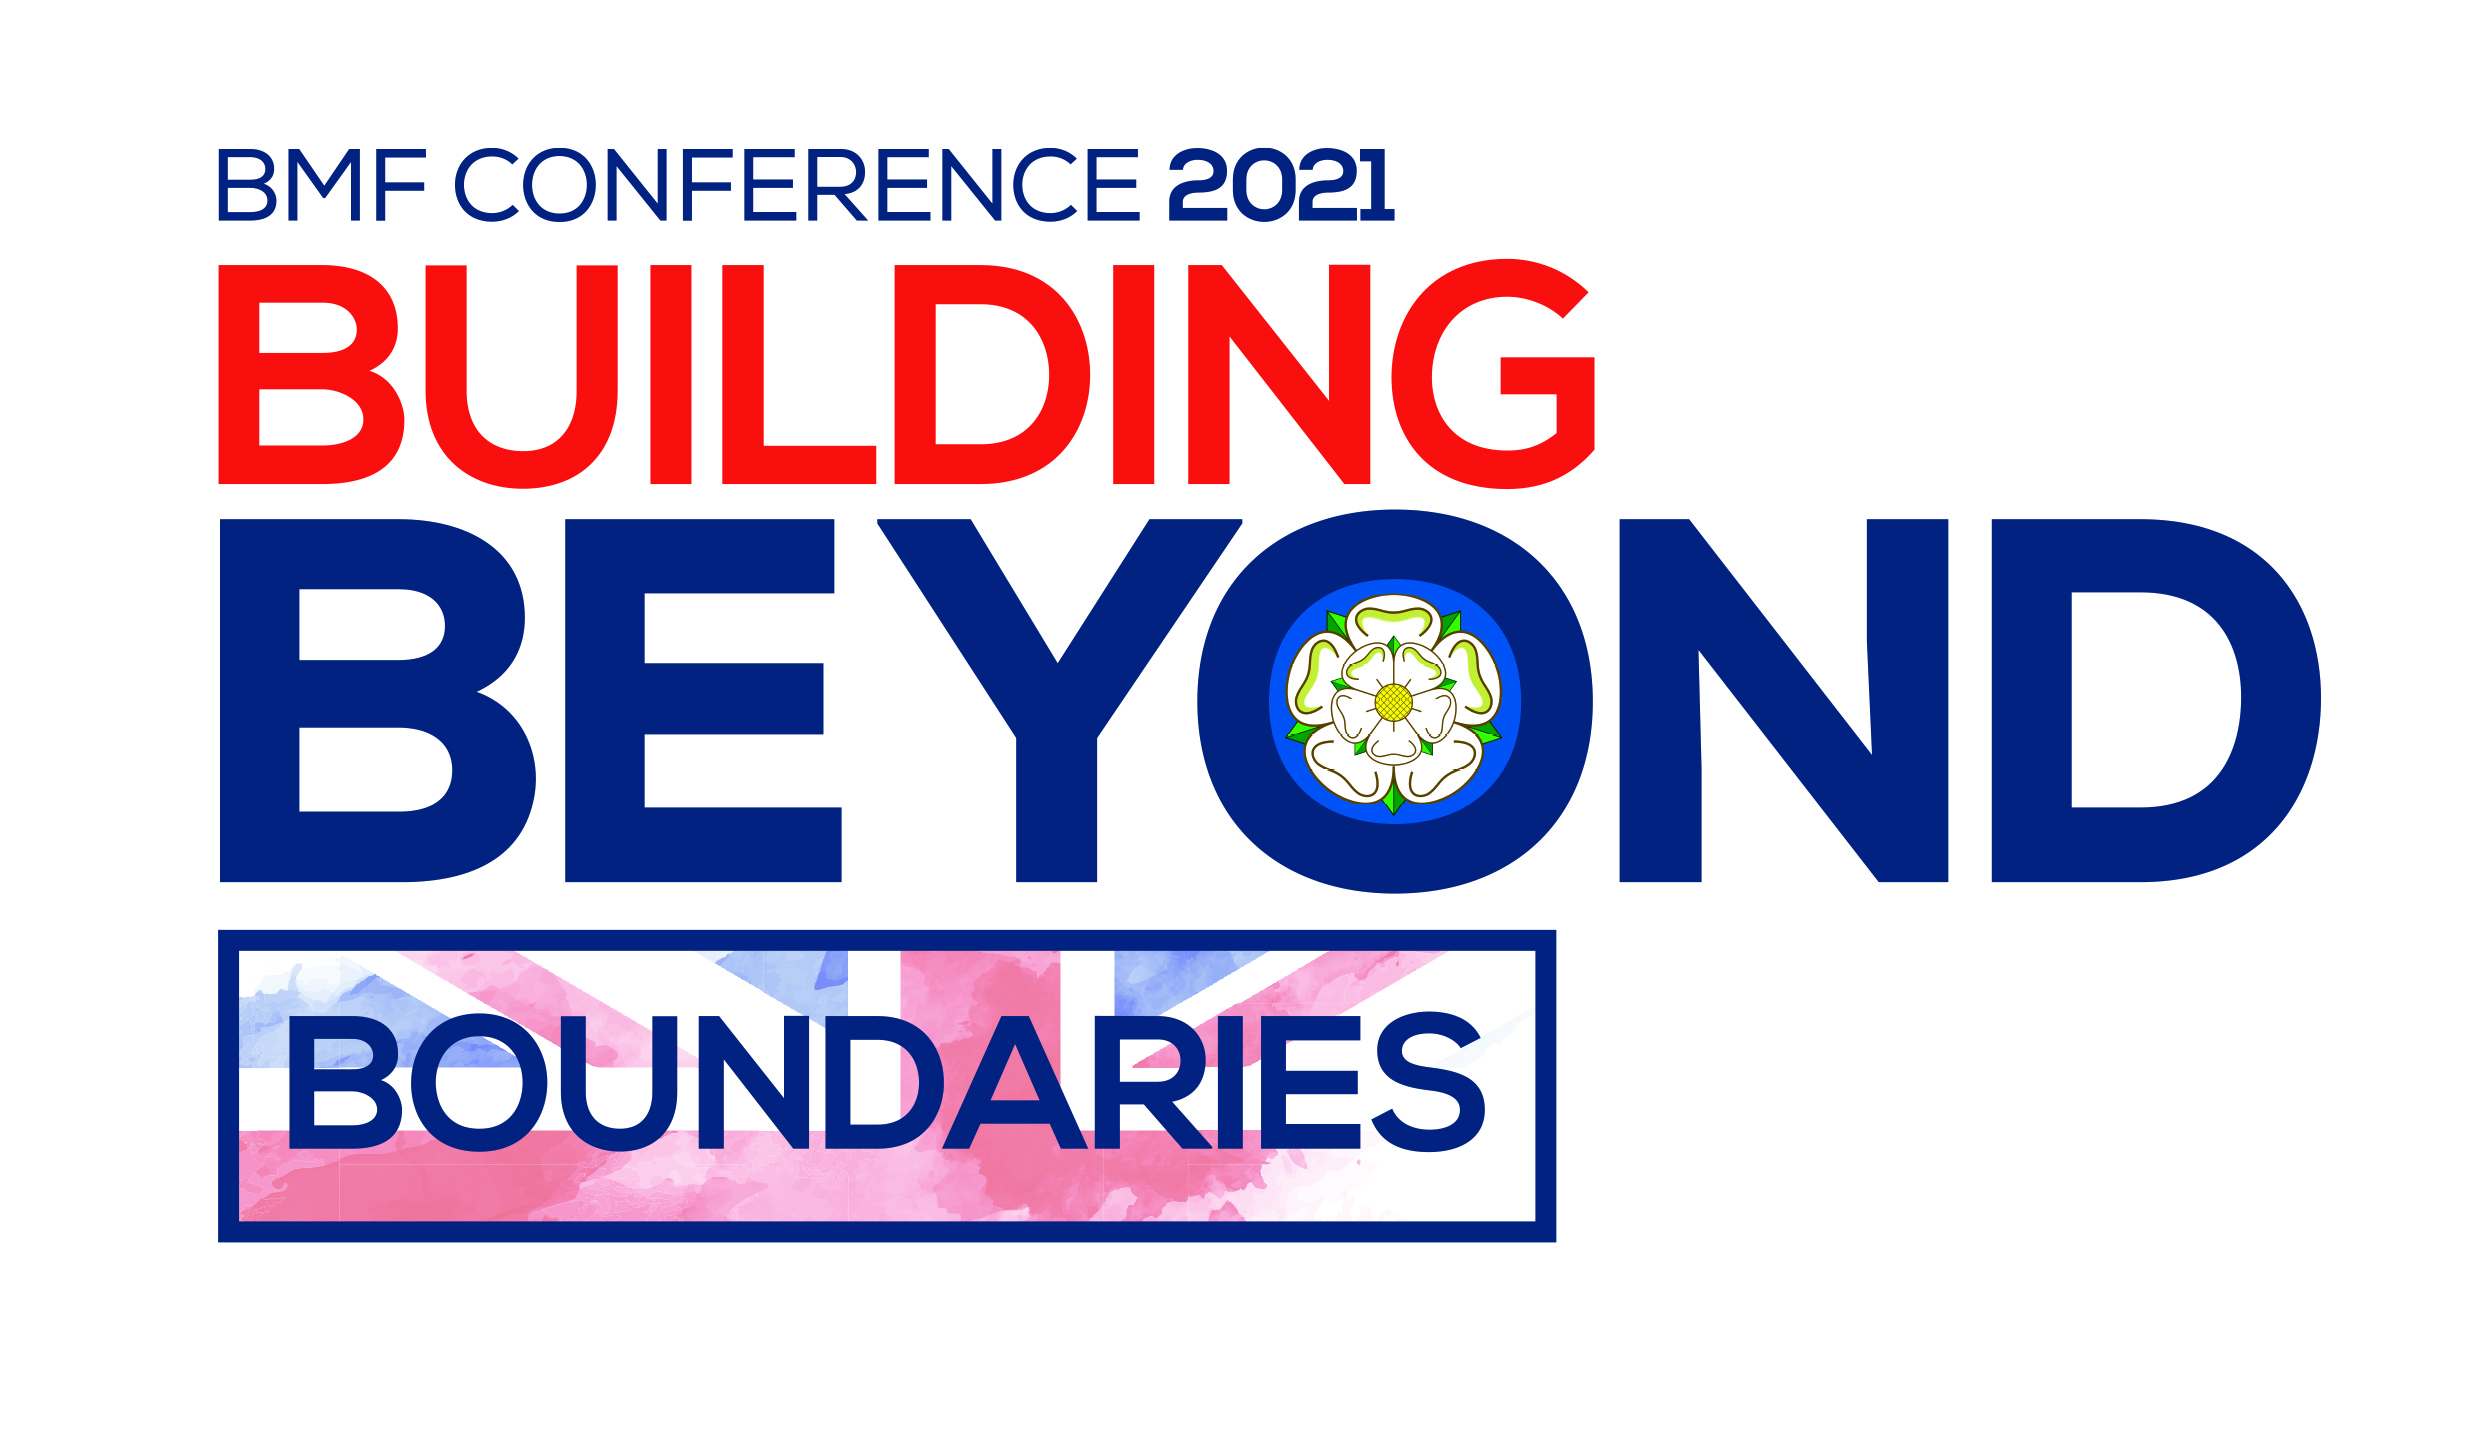 BMF ALL INDUSTRY CONFERENCE 2021